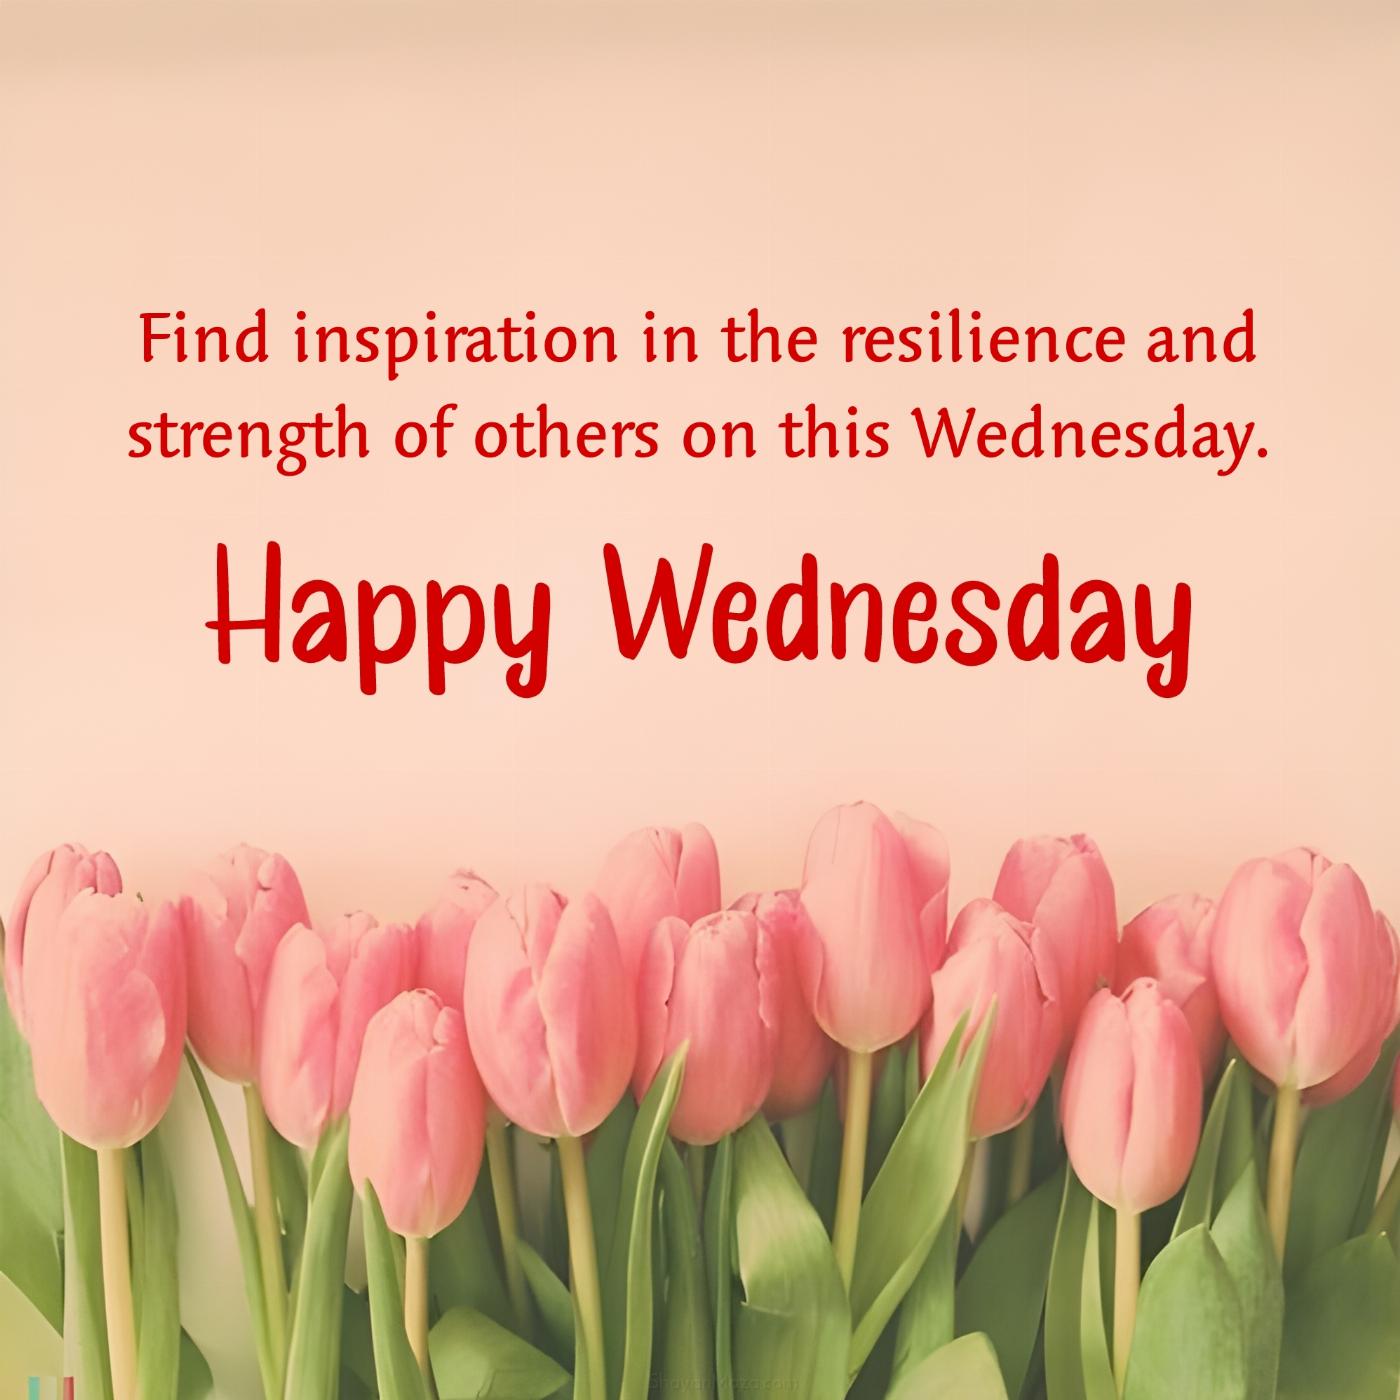 Find inspiration in the resilience and strength of others on this Wednesday